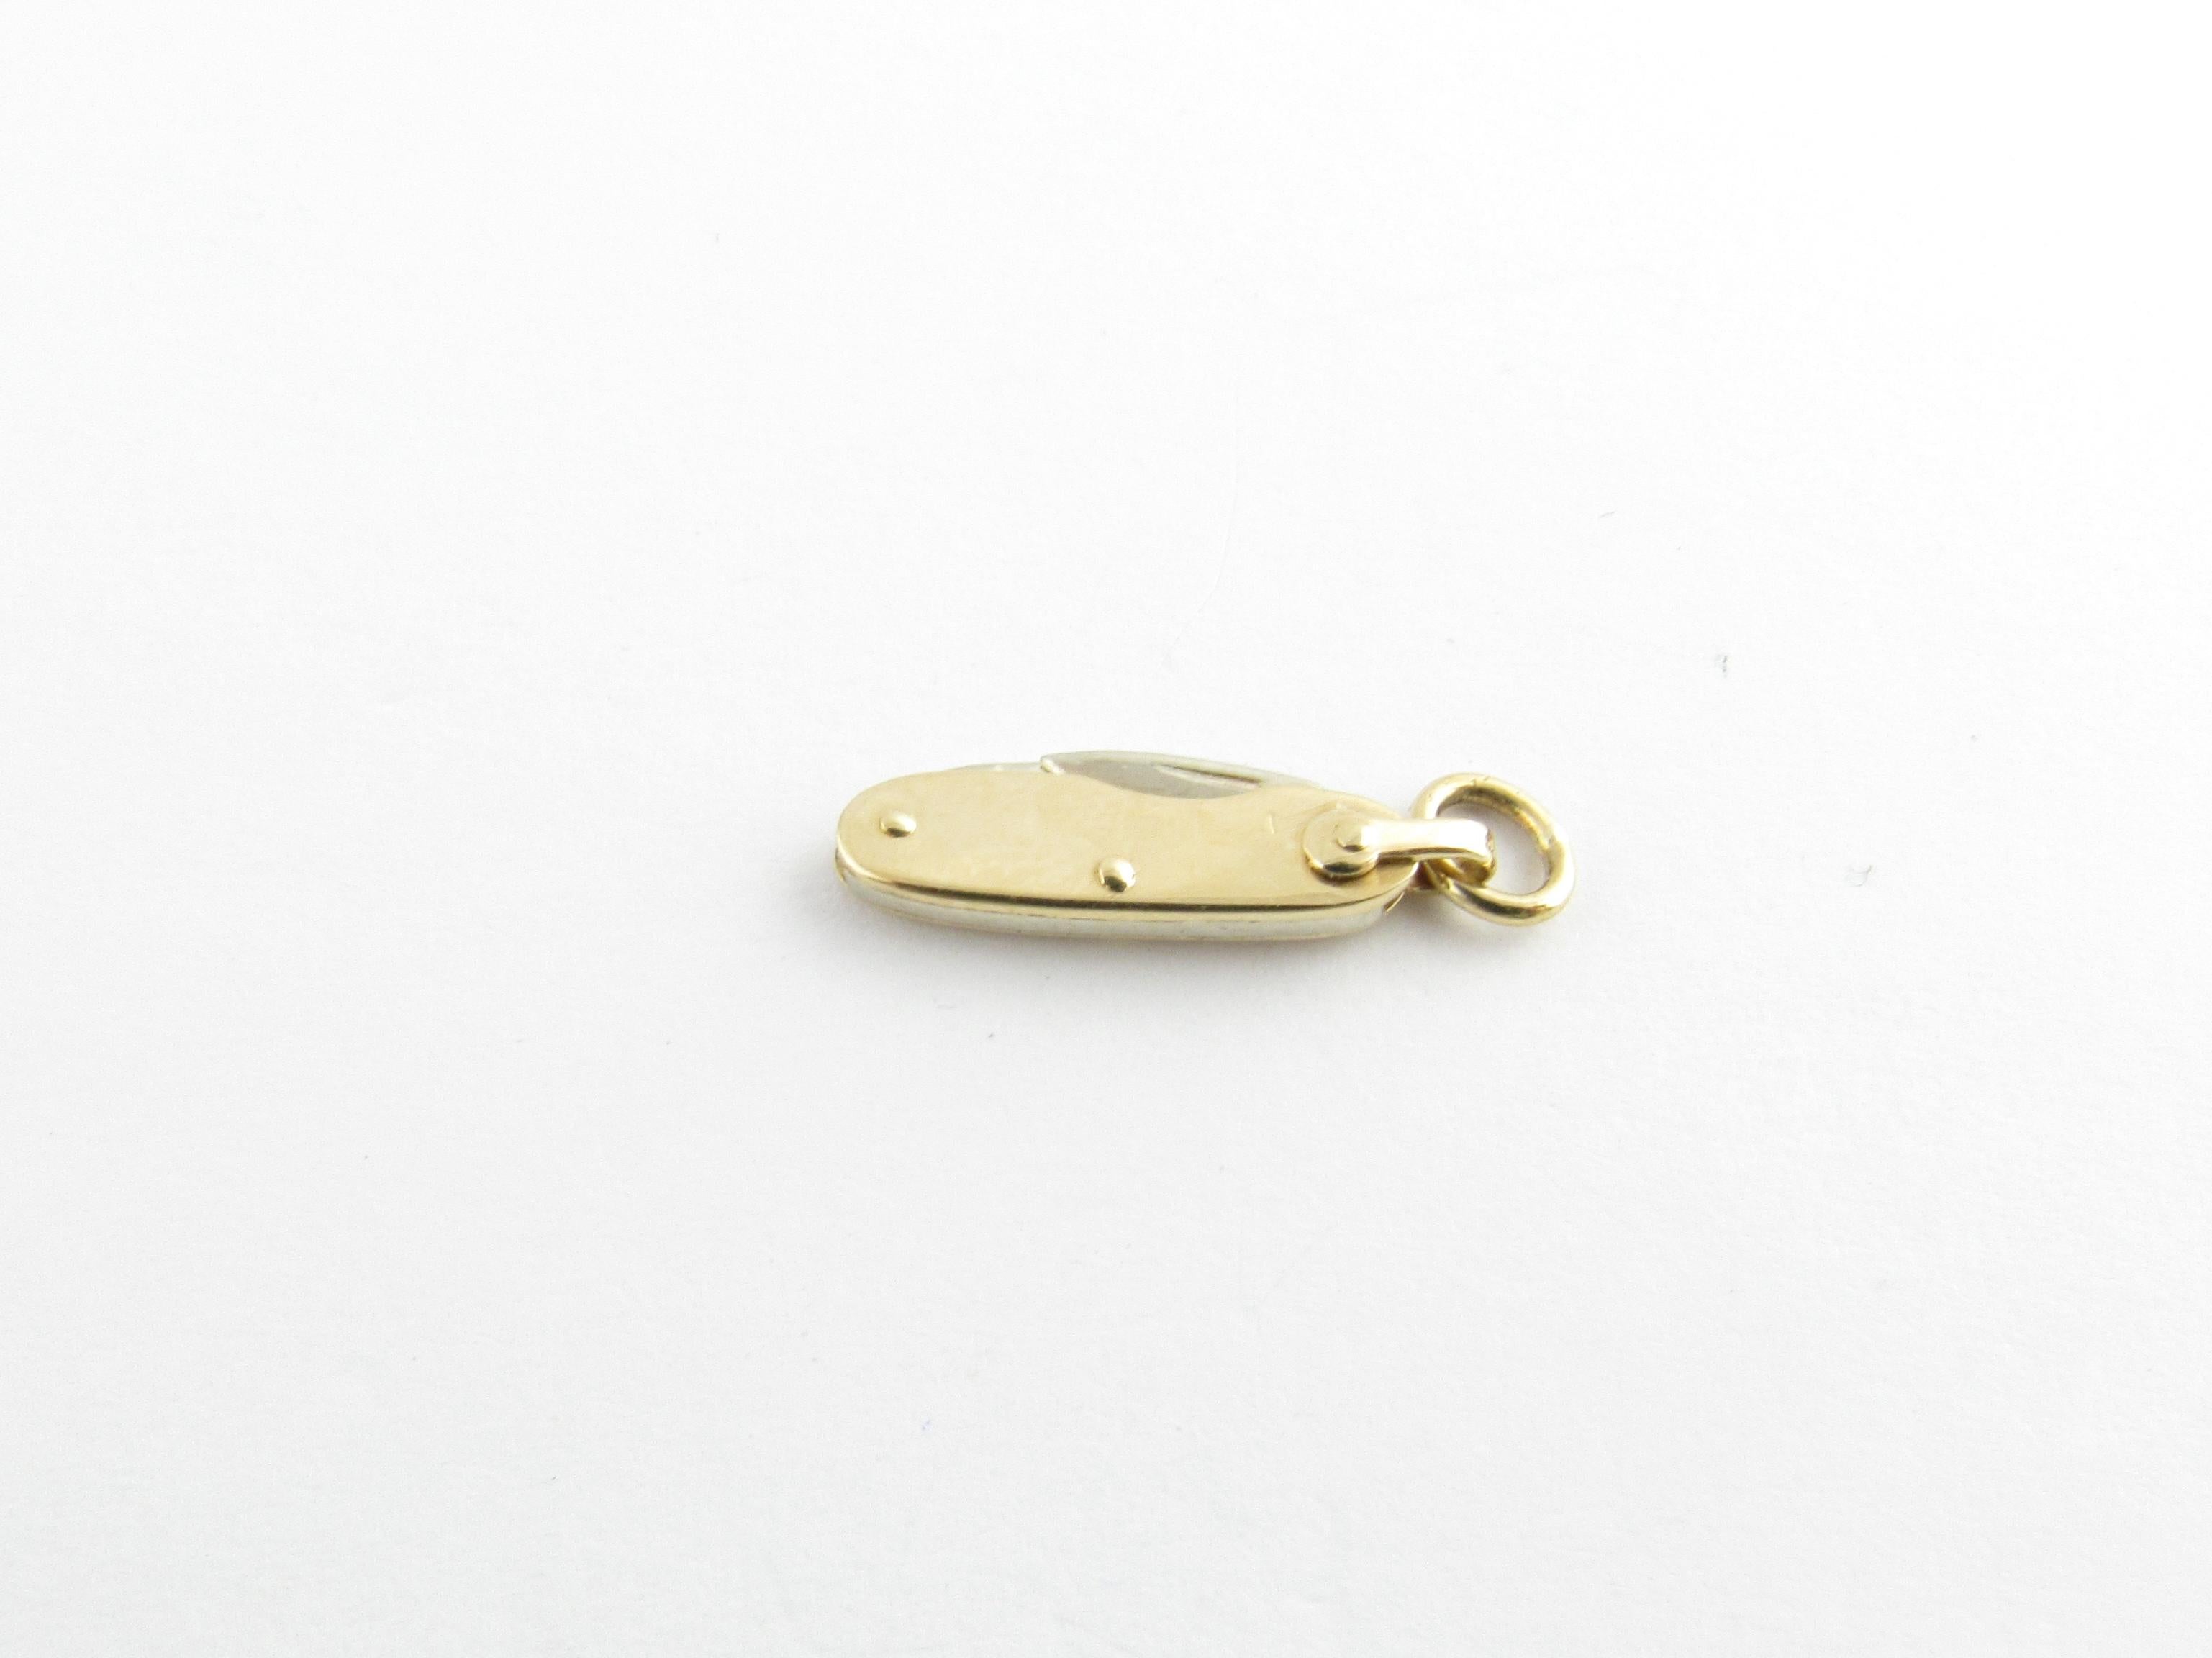 Vintage 14 Karat Yellow Gold Pocket Knife Charm

This unique 3D charm features a miniature hinged pocket knife meticulously detailed in 14K yellow gold.

Size: 17 mm x 5 mm (actual charm)

Weight: 0.7 dwt. / 1.1 gr.

Acid tested for 14K gold.

Very